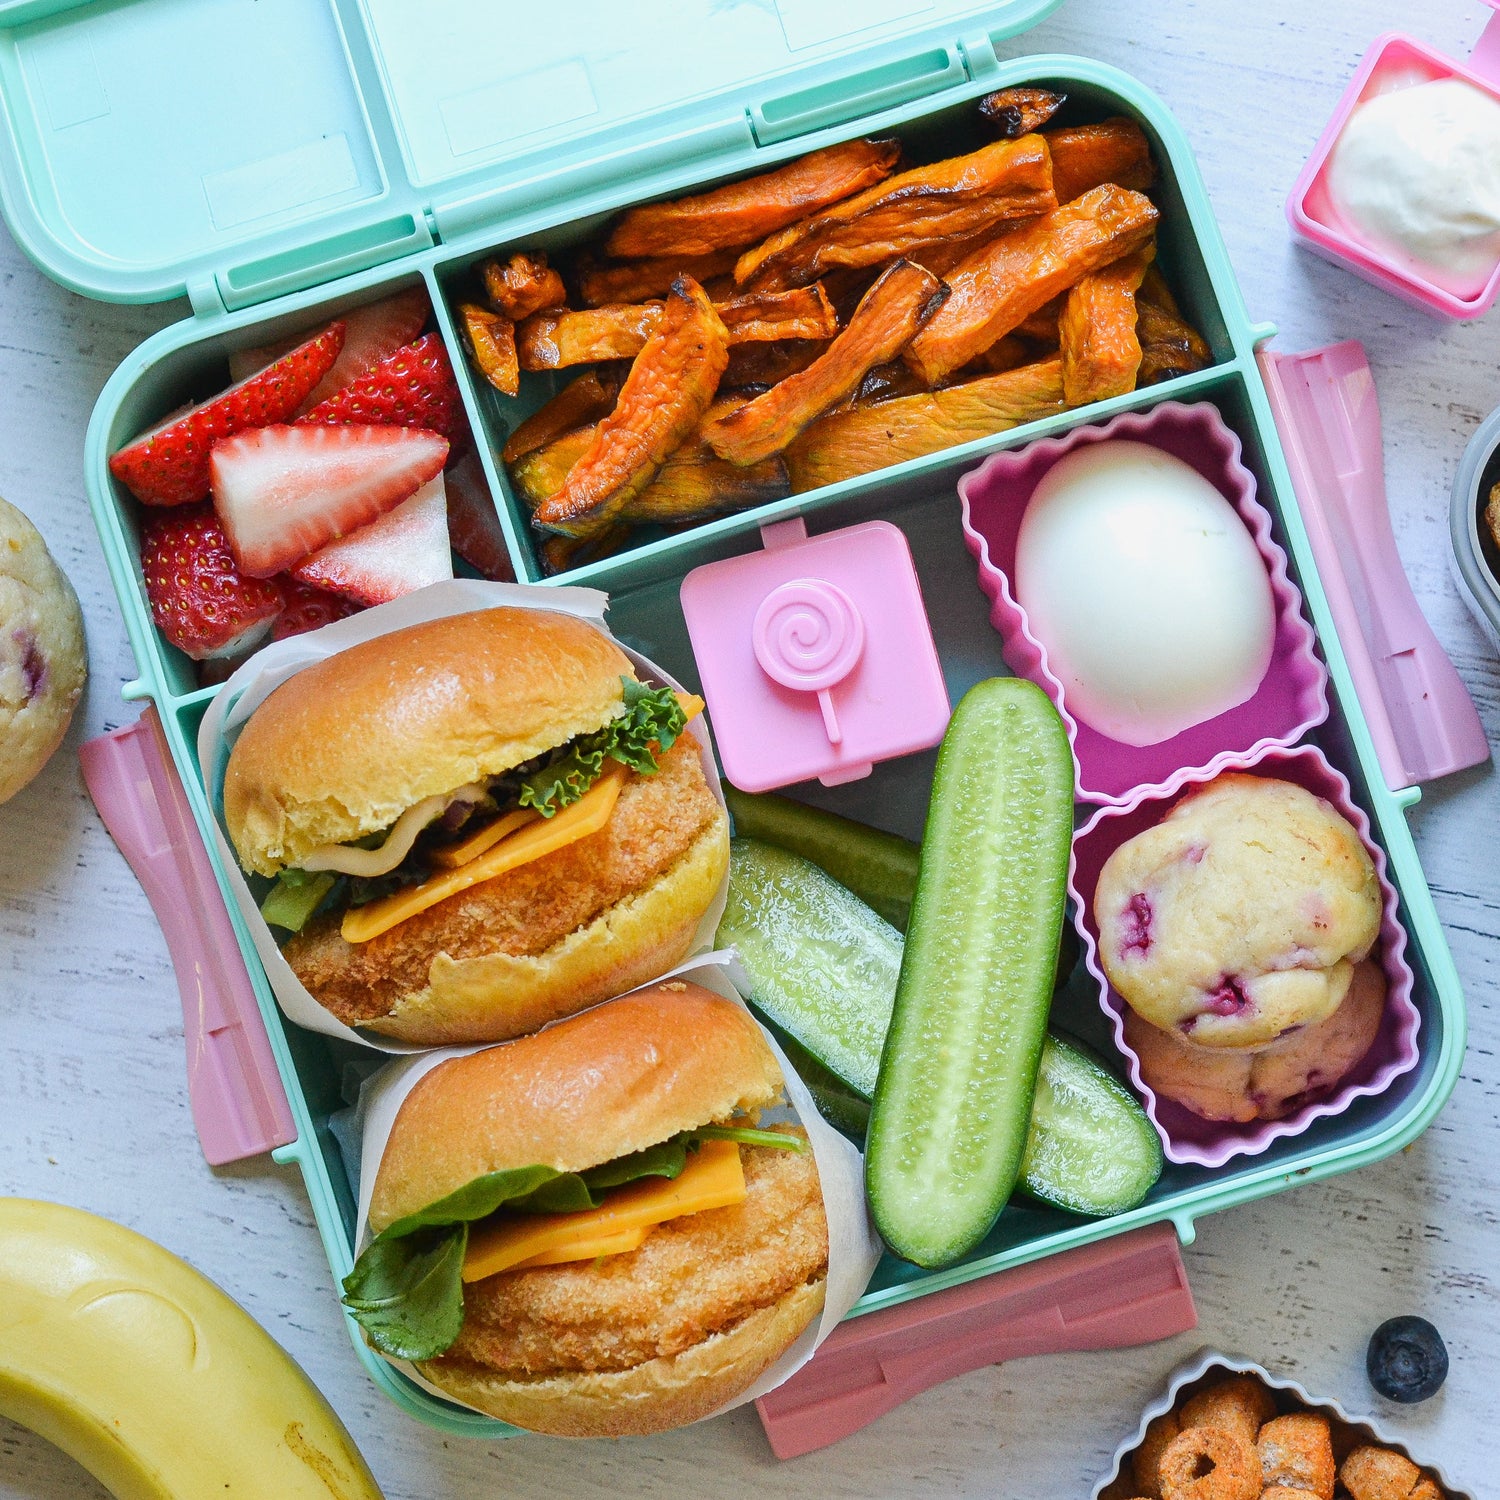 LITTLE LUNCHBOX CO BENTO THREE+ Coal by LITTLE LUNCHBOX CO - The Playful Collective